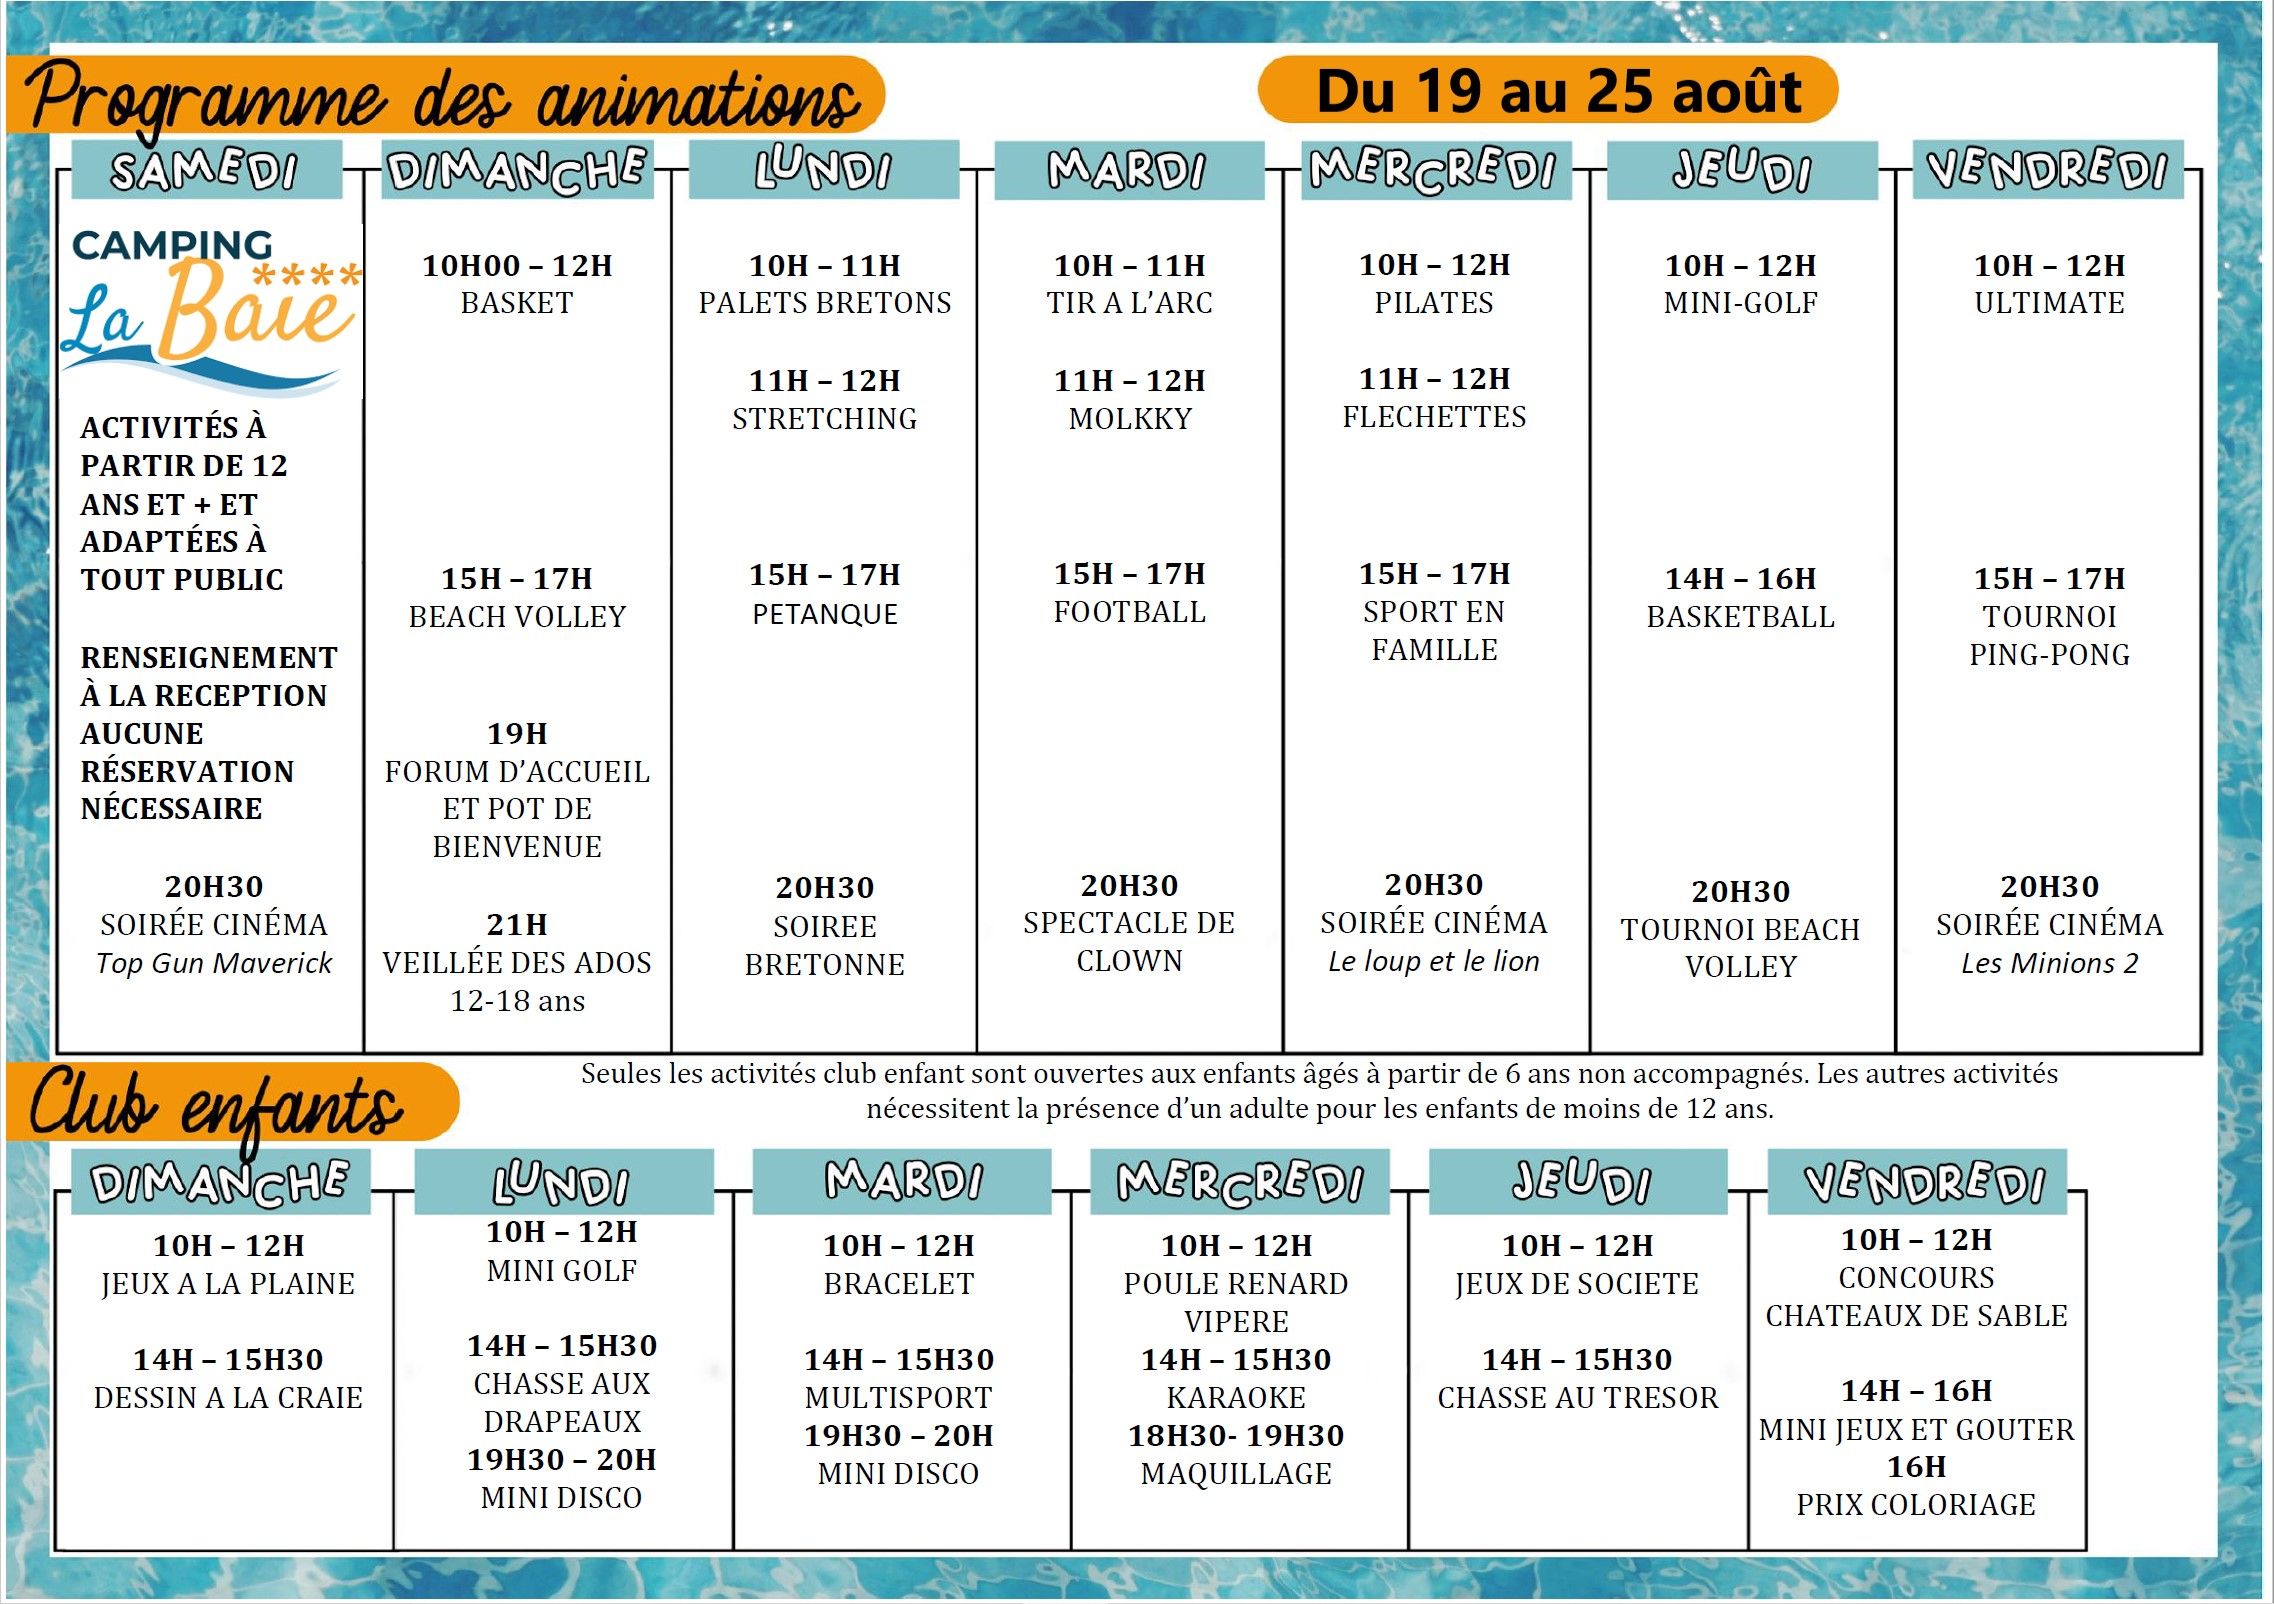 programme-animations-19-25-aout.jpg